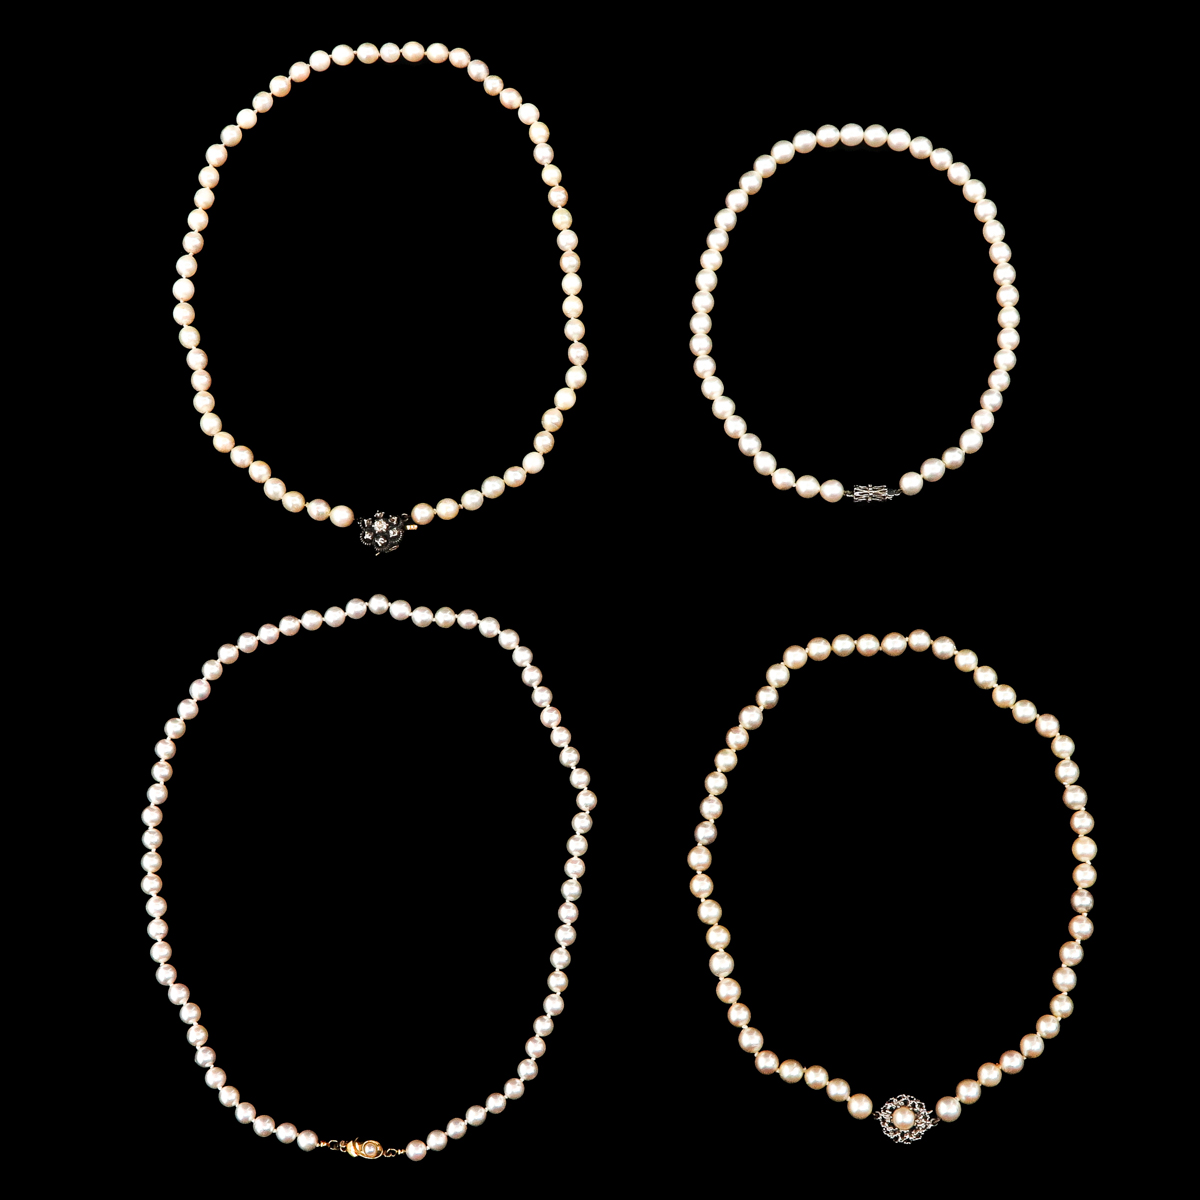 A Collection of 4 Pearl Necklaces